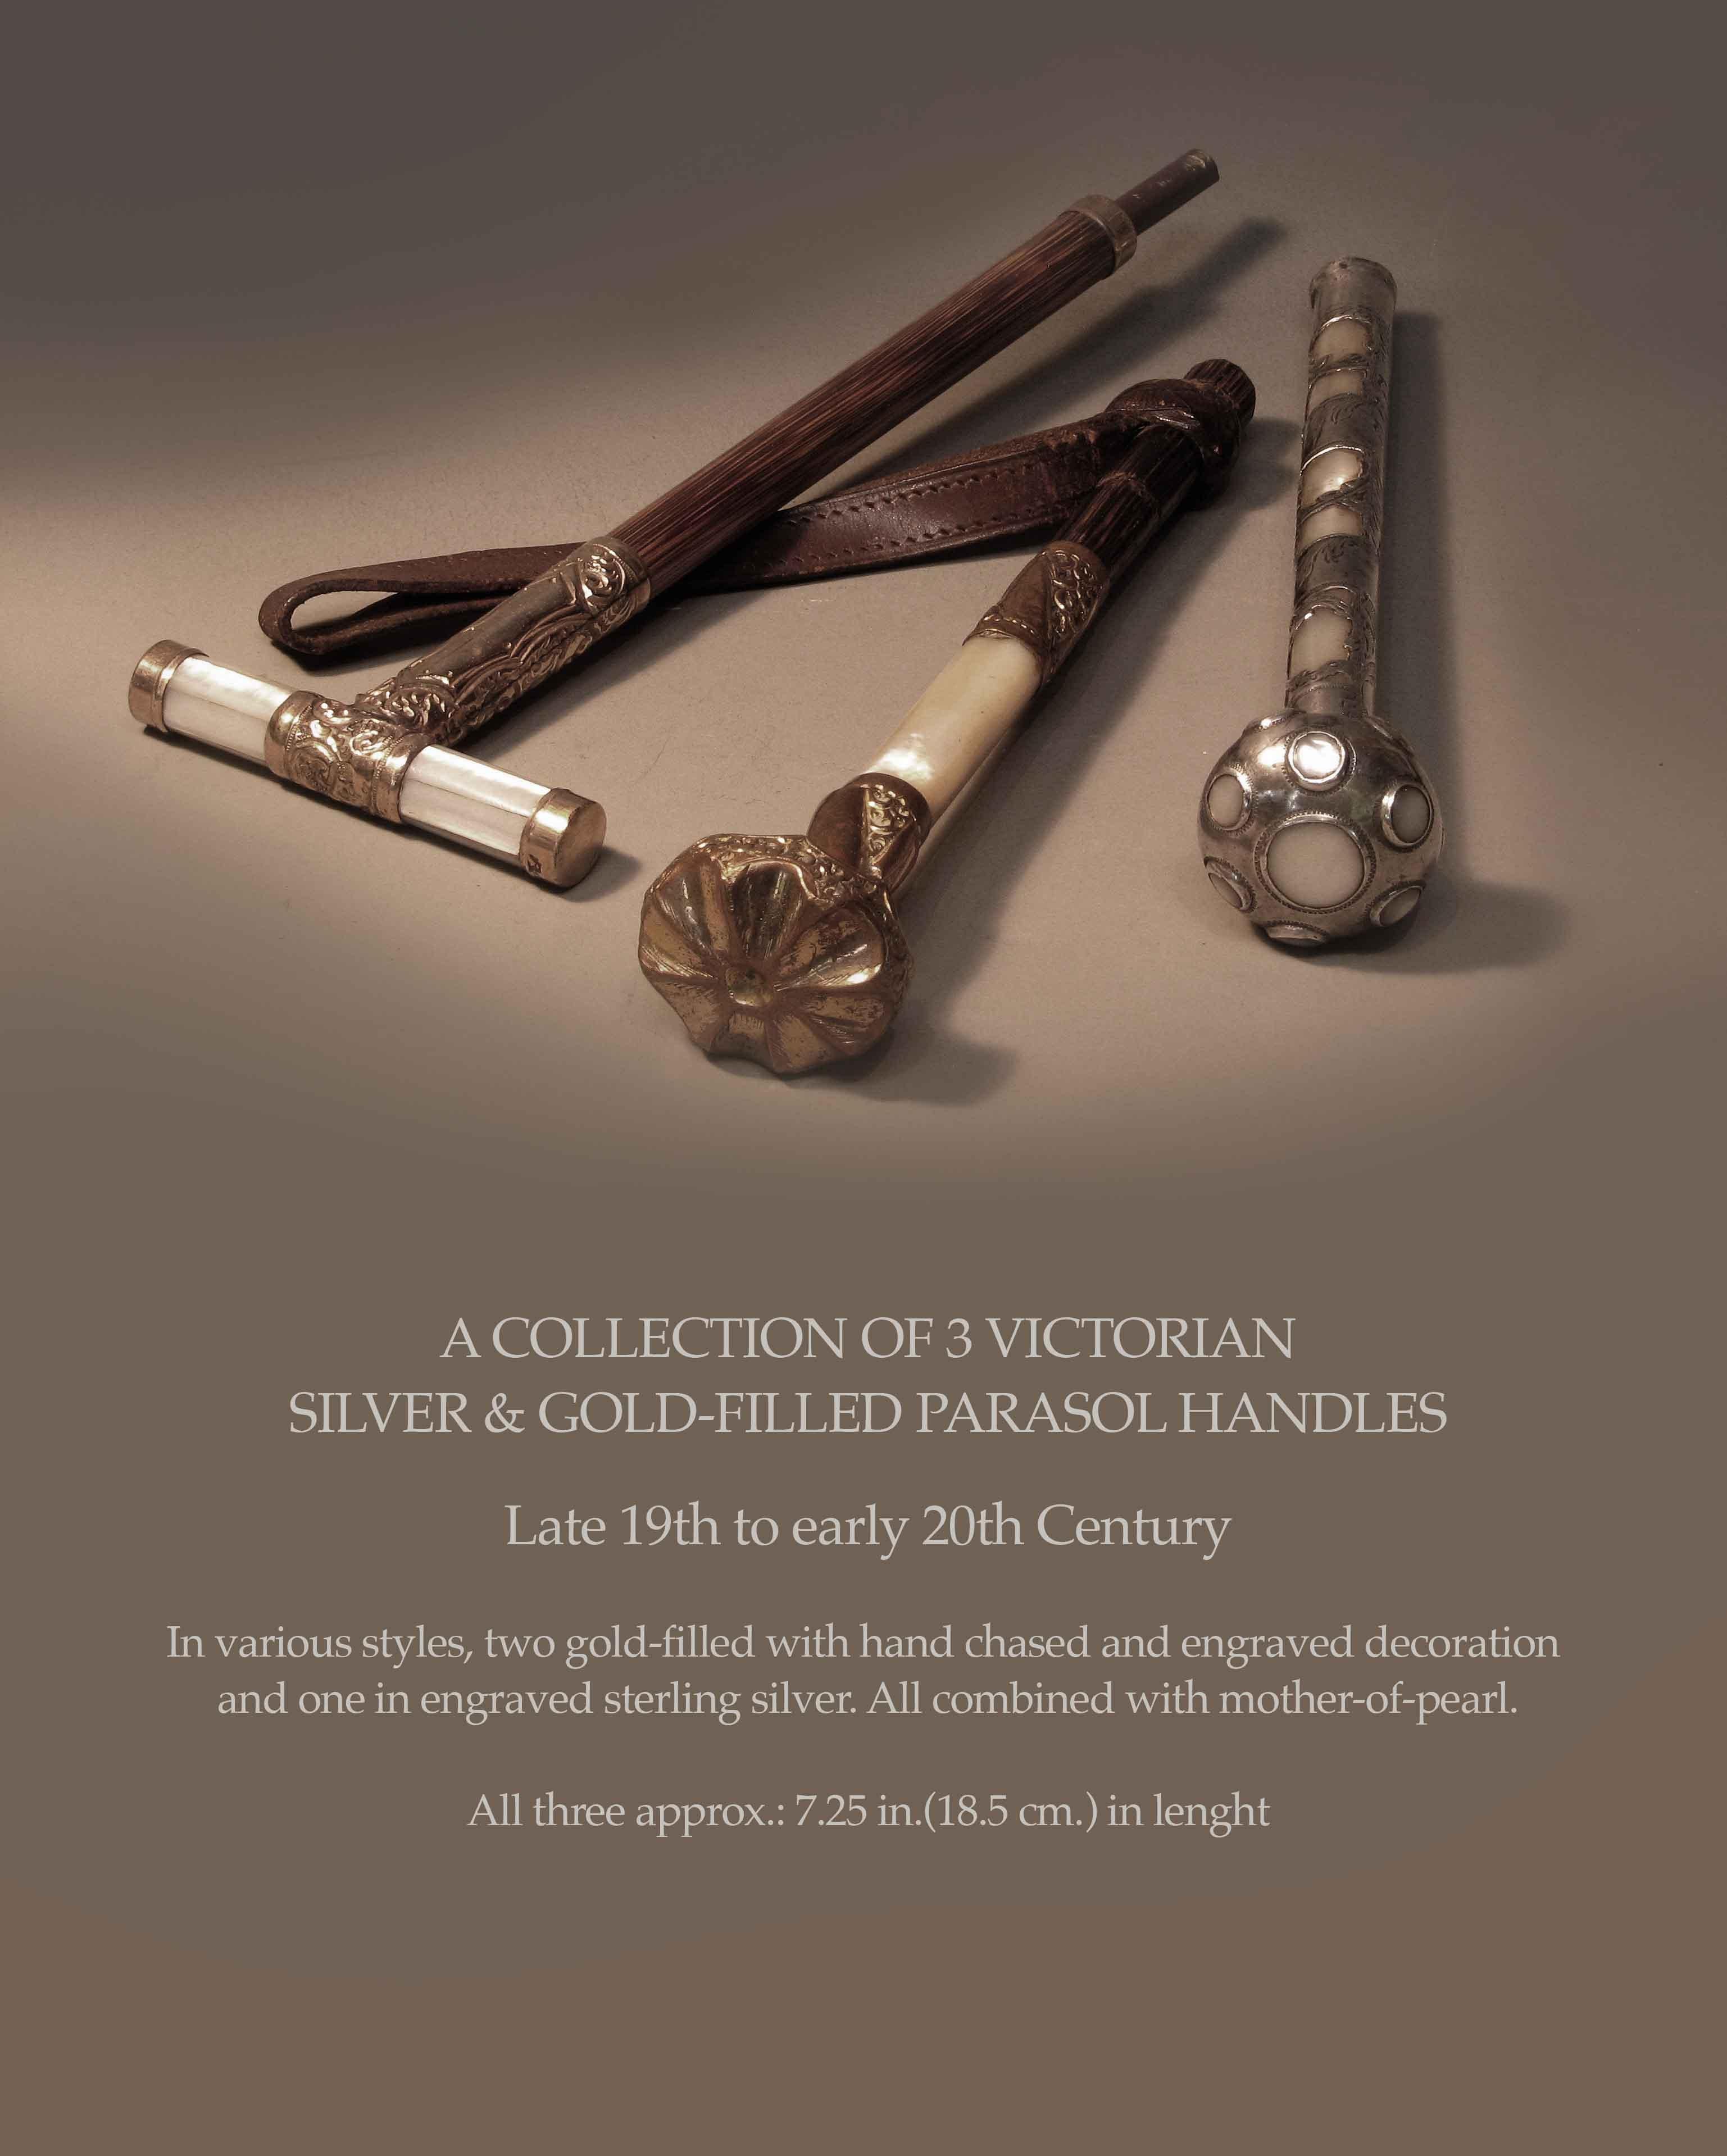 A COLLECTION OF 3 VICTORIAN
SILVER & GOLD-FILLED PARASOL HANDLES

Late 19th to early 20th Century.

In various styles, two gold-filled with hand chased and engraved decoration
and one in engraved sterling silver. 
All combined with